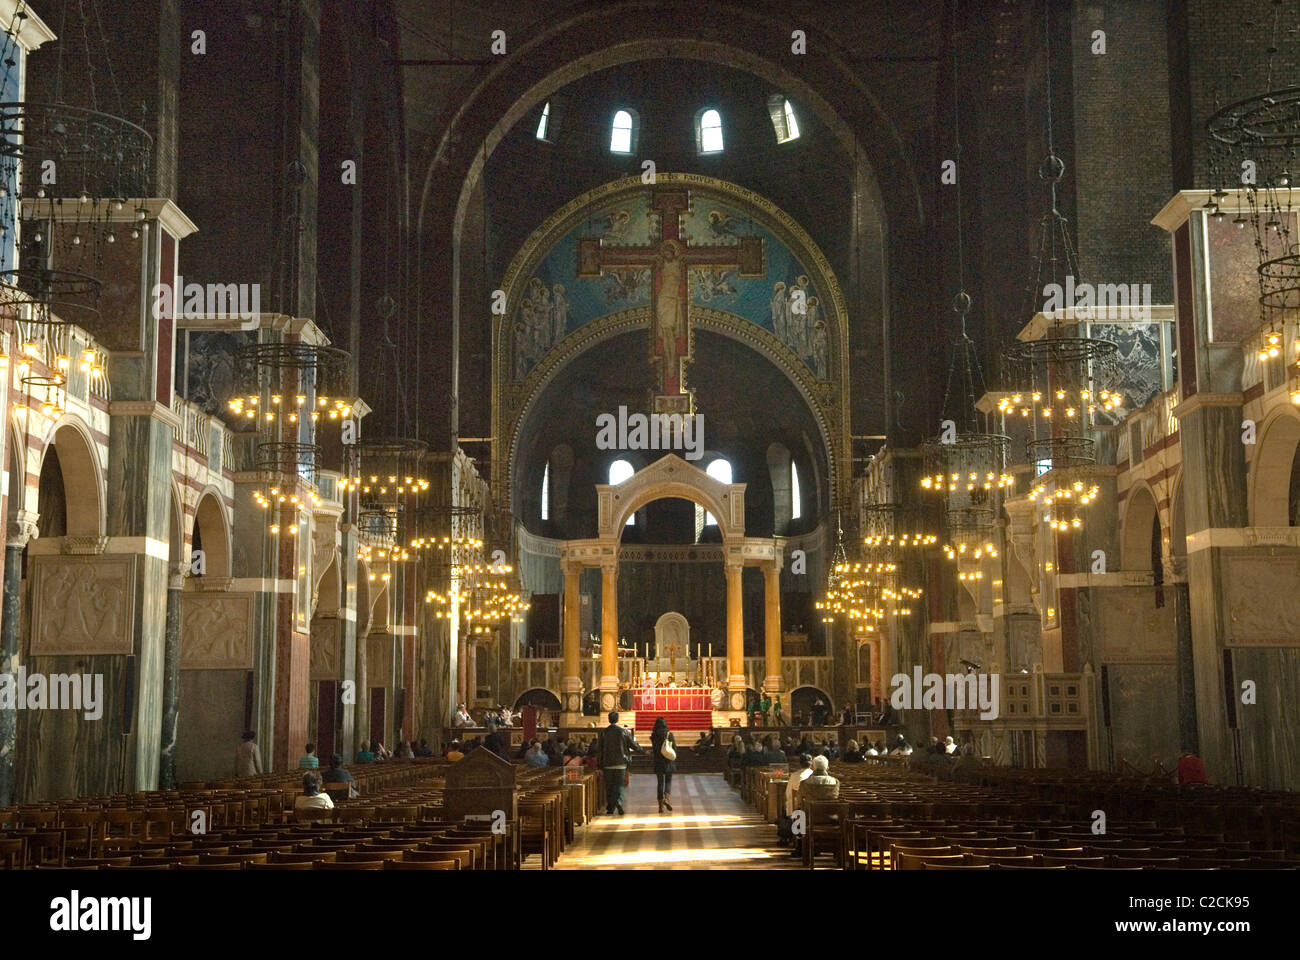 Westminster Roman Catholic Cathedral, Victoria Street, Victoria, London Uk. Interior. looking towards the altar. 2010s 2011 England HOMER SYKES Stock Photo